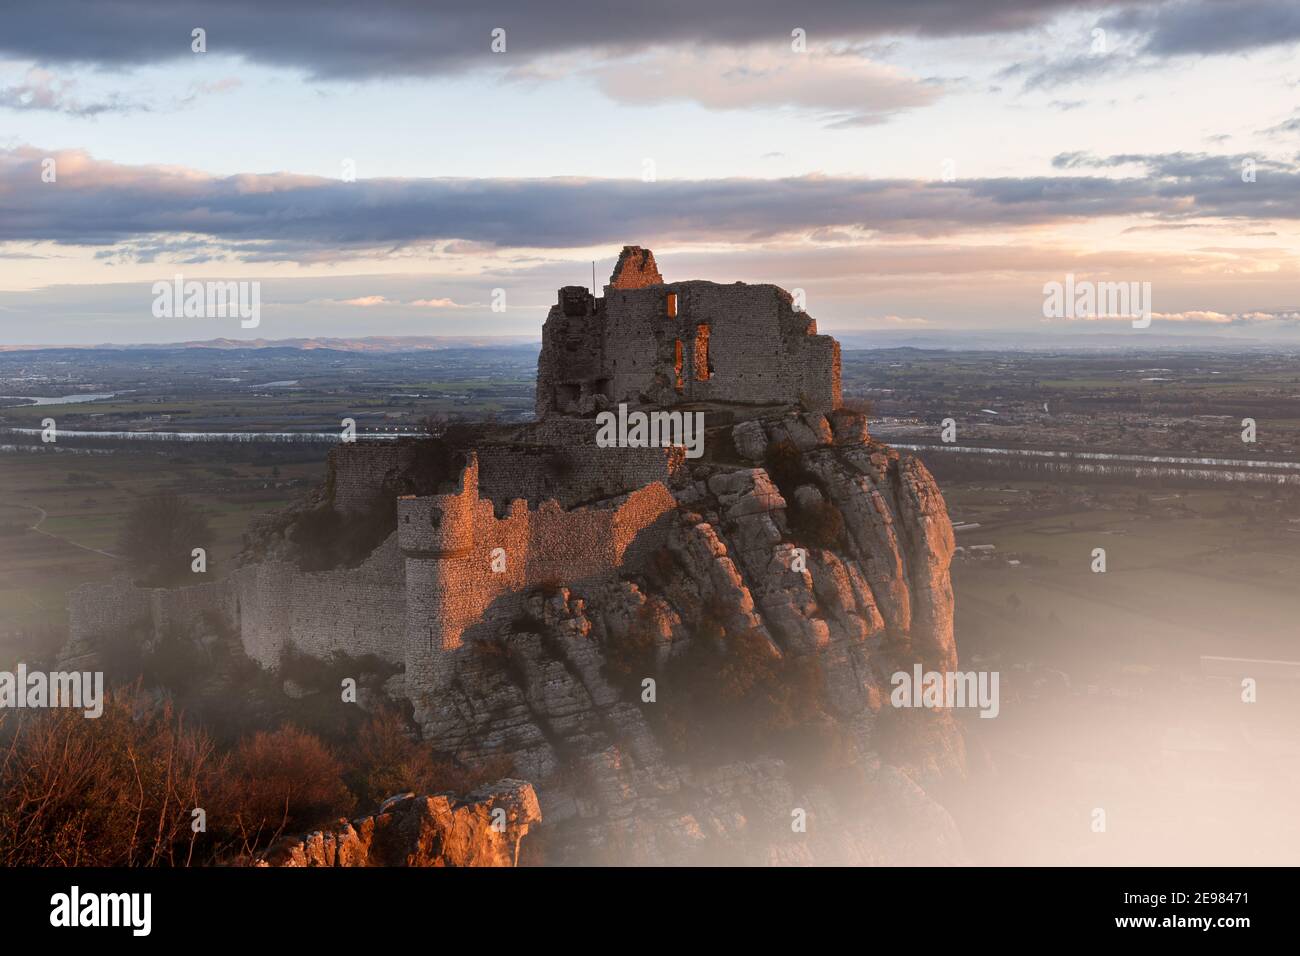 French winter landscapes. Stunning panoramic view of castle ruins Crussol. Foggy mountain landscape at sunrise. Stock Photo